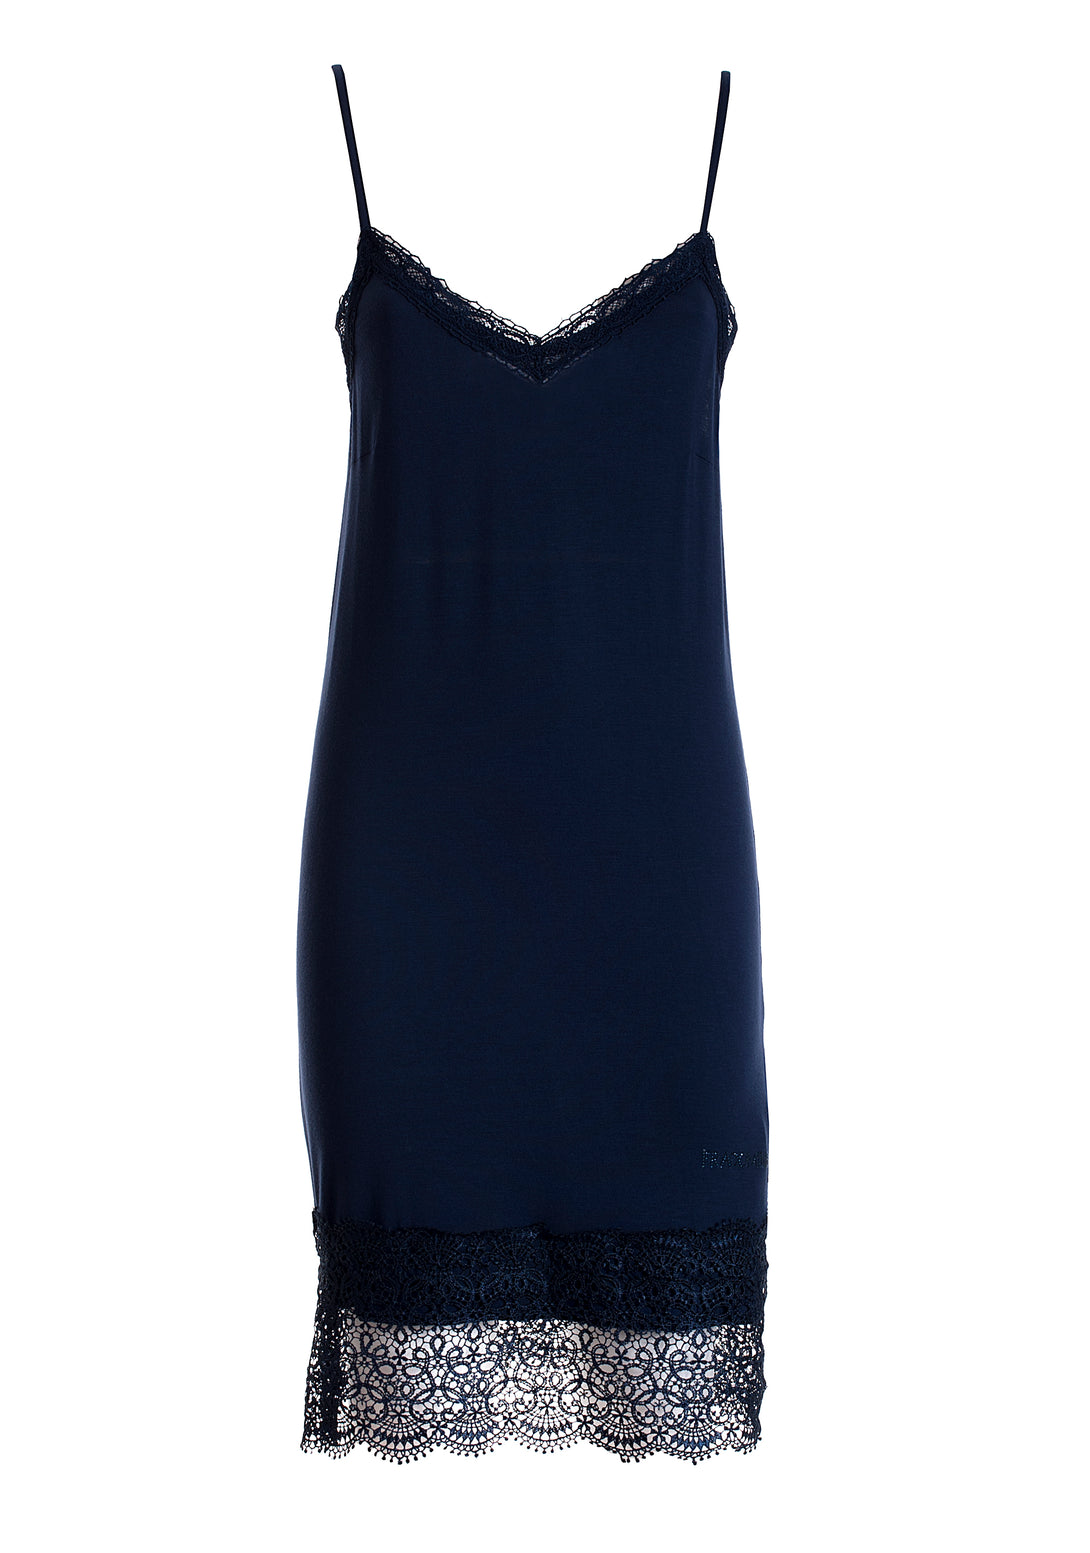 Slip dress regular and tight fit with lace details